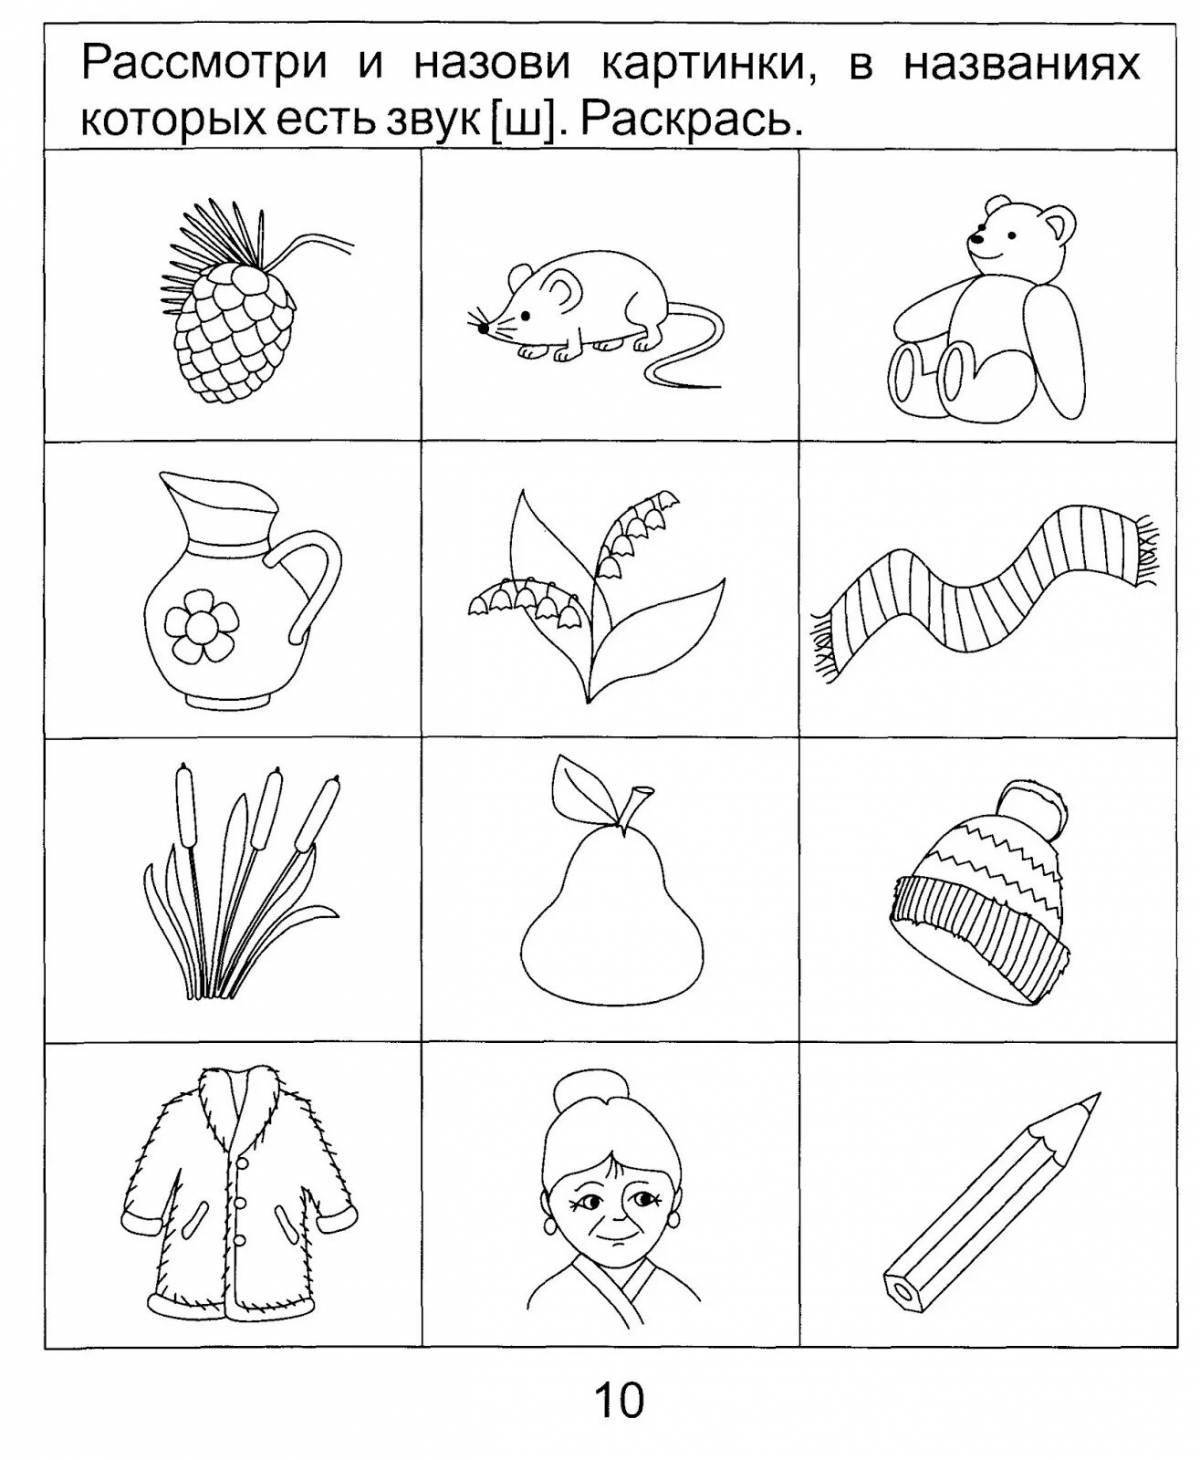 Creative sh sound speech therapy coloring page